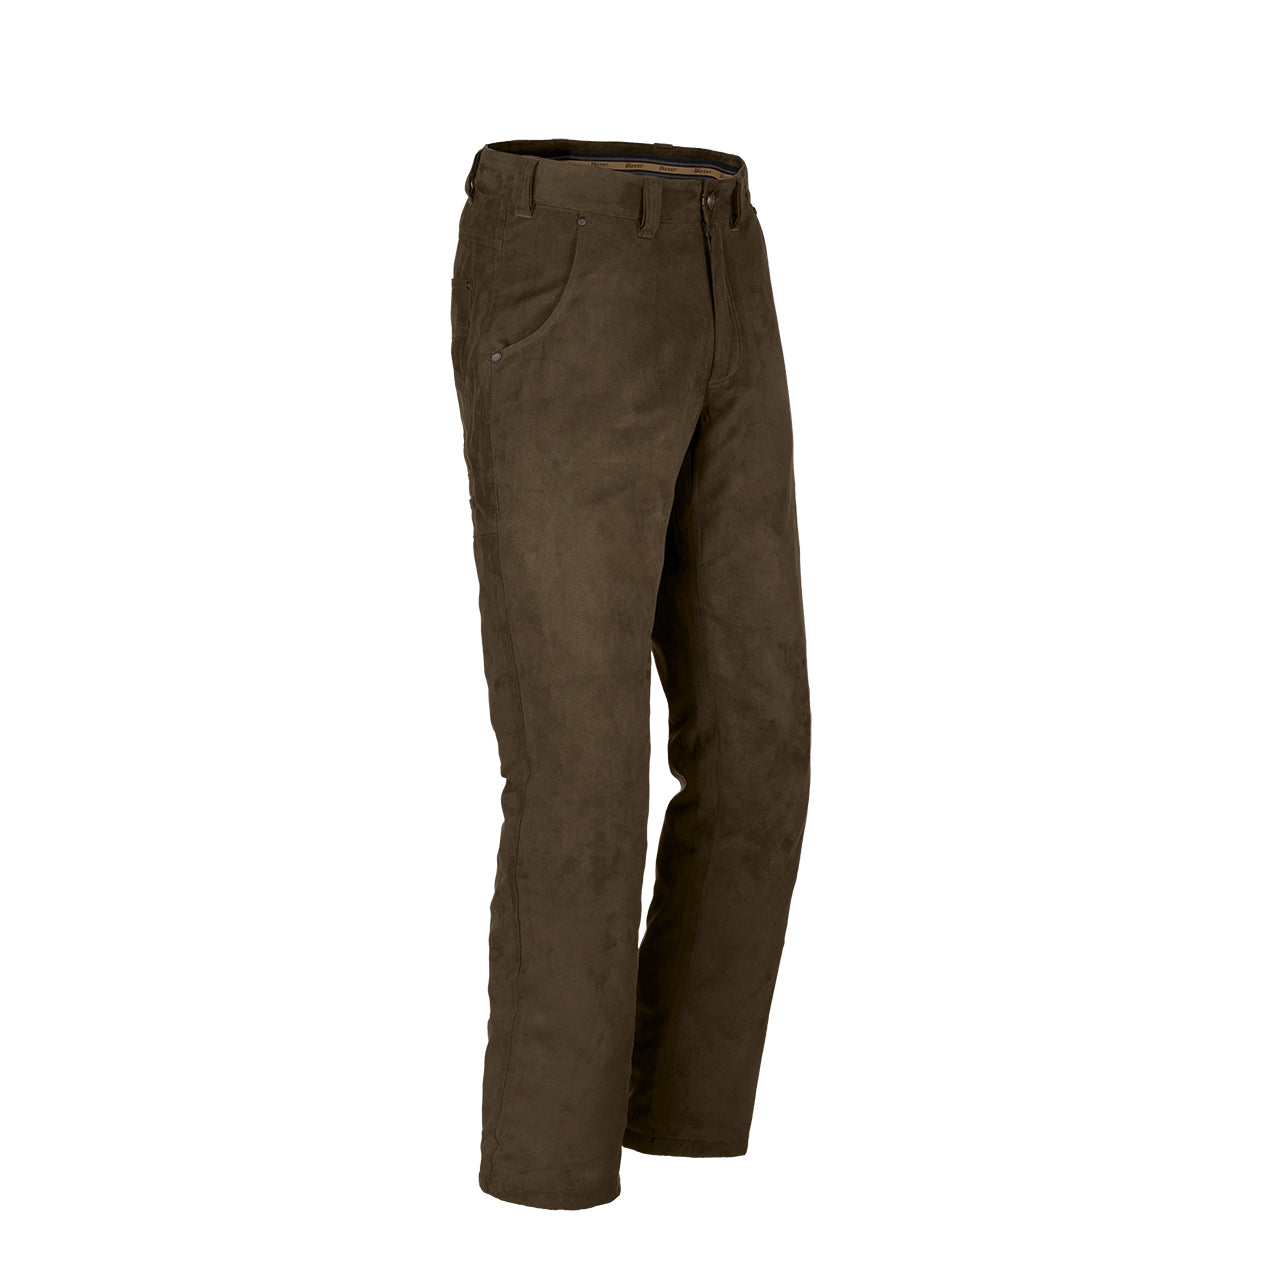 Marlon  Suede Trousers  Brown  Size 48  Color darkbrown1